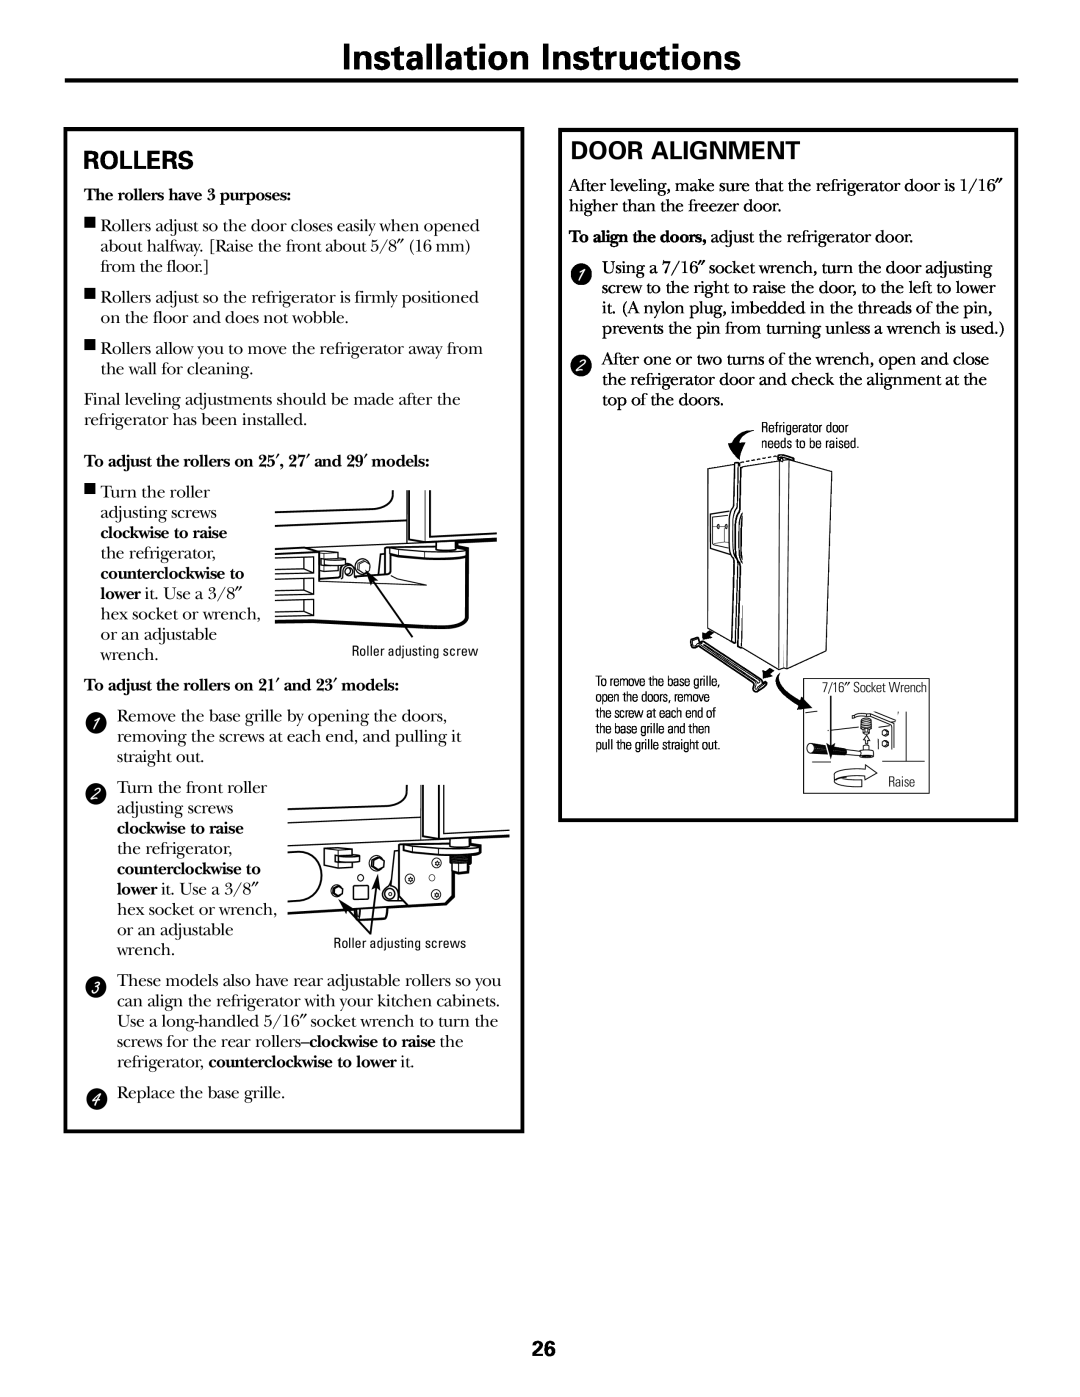 GE 200D2600P031 operating instructions Installation Instructions, Rollers, Door Alignment 